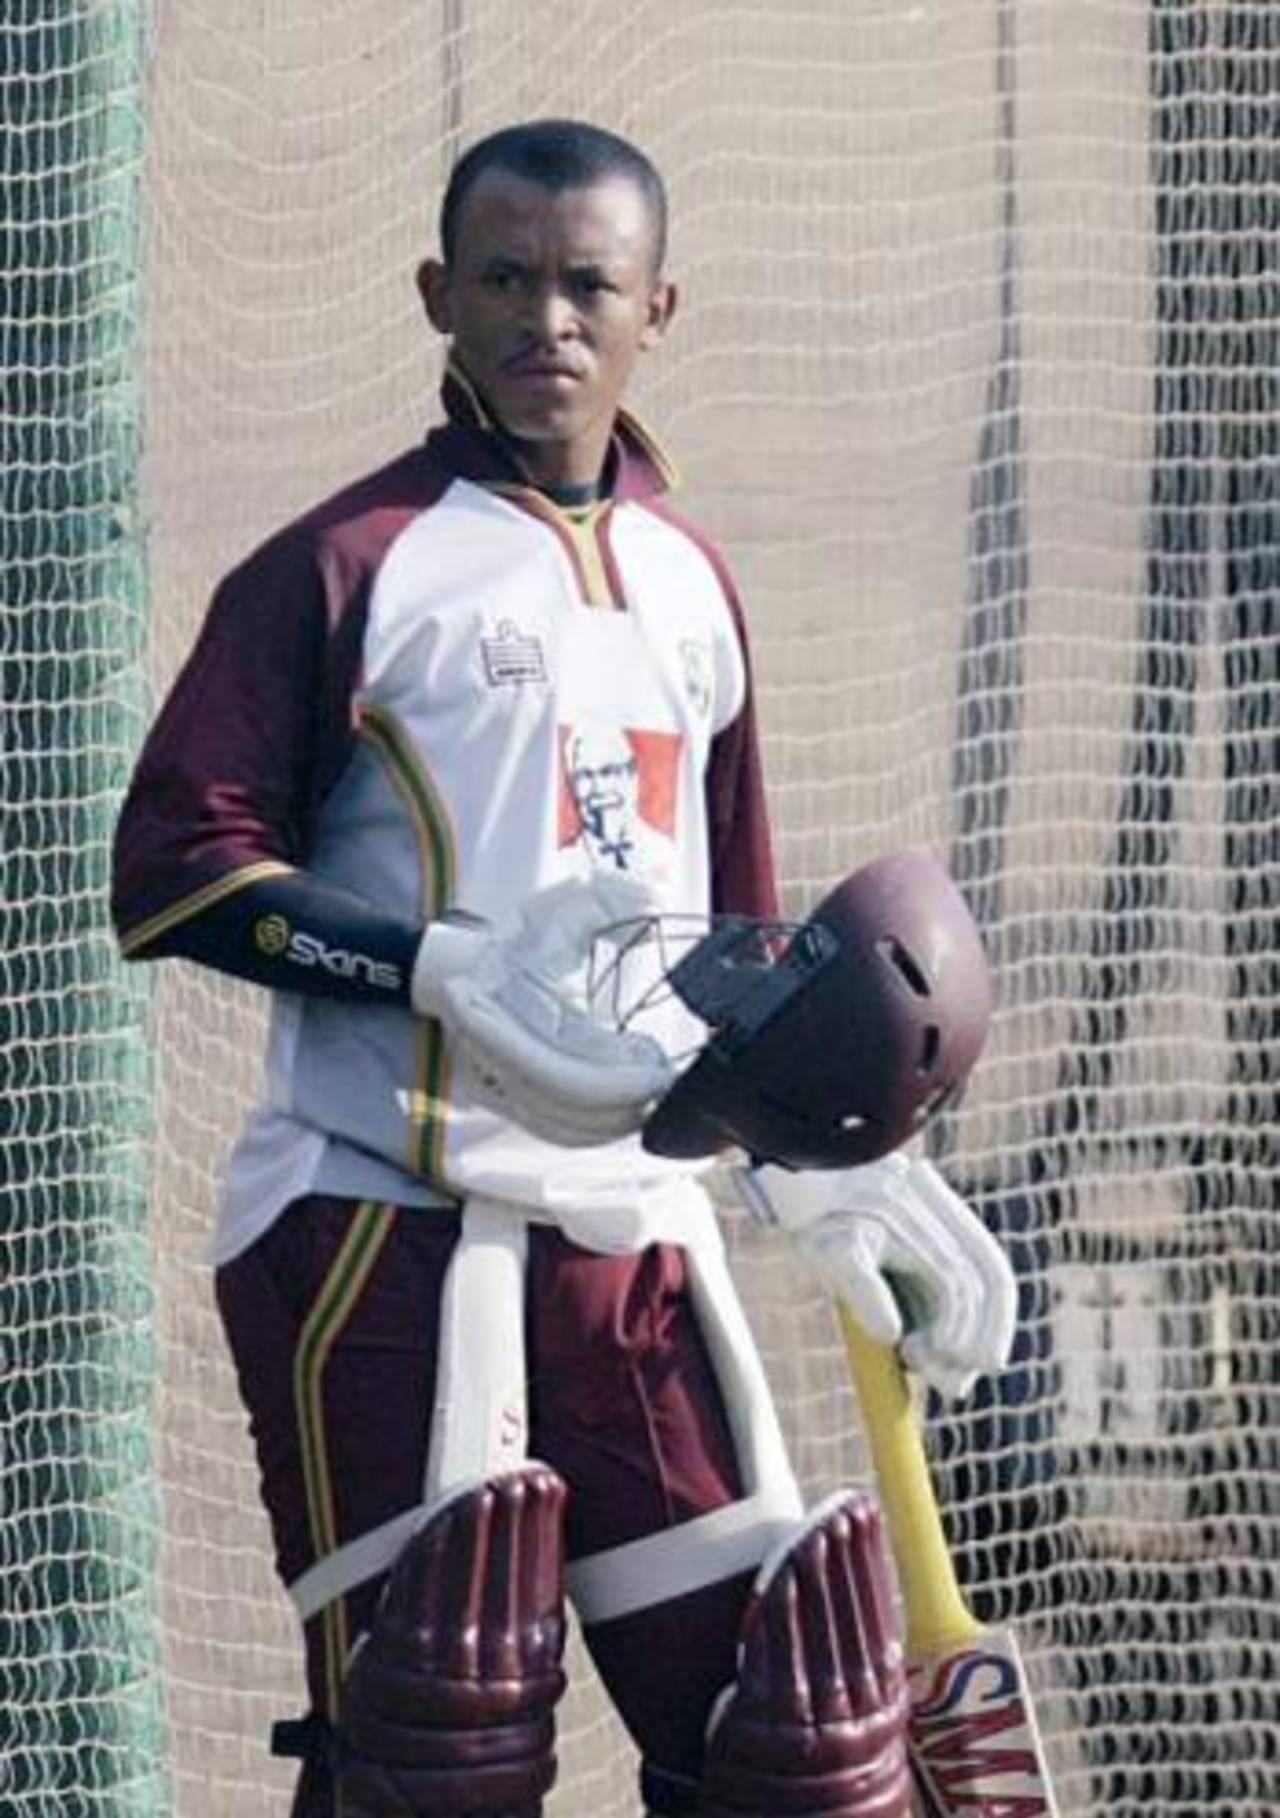 Carlton Baugh in pensive mood in the nets ahead of West Indies' match against England tomorrow, Ahmedabad, October 27, 2006